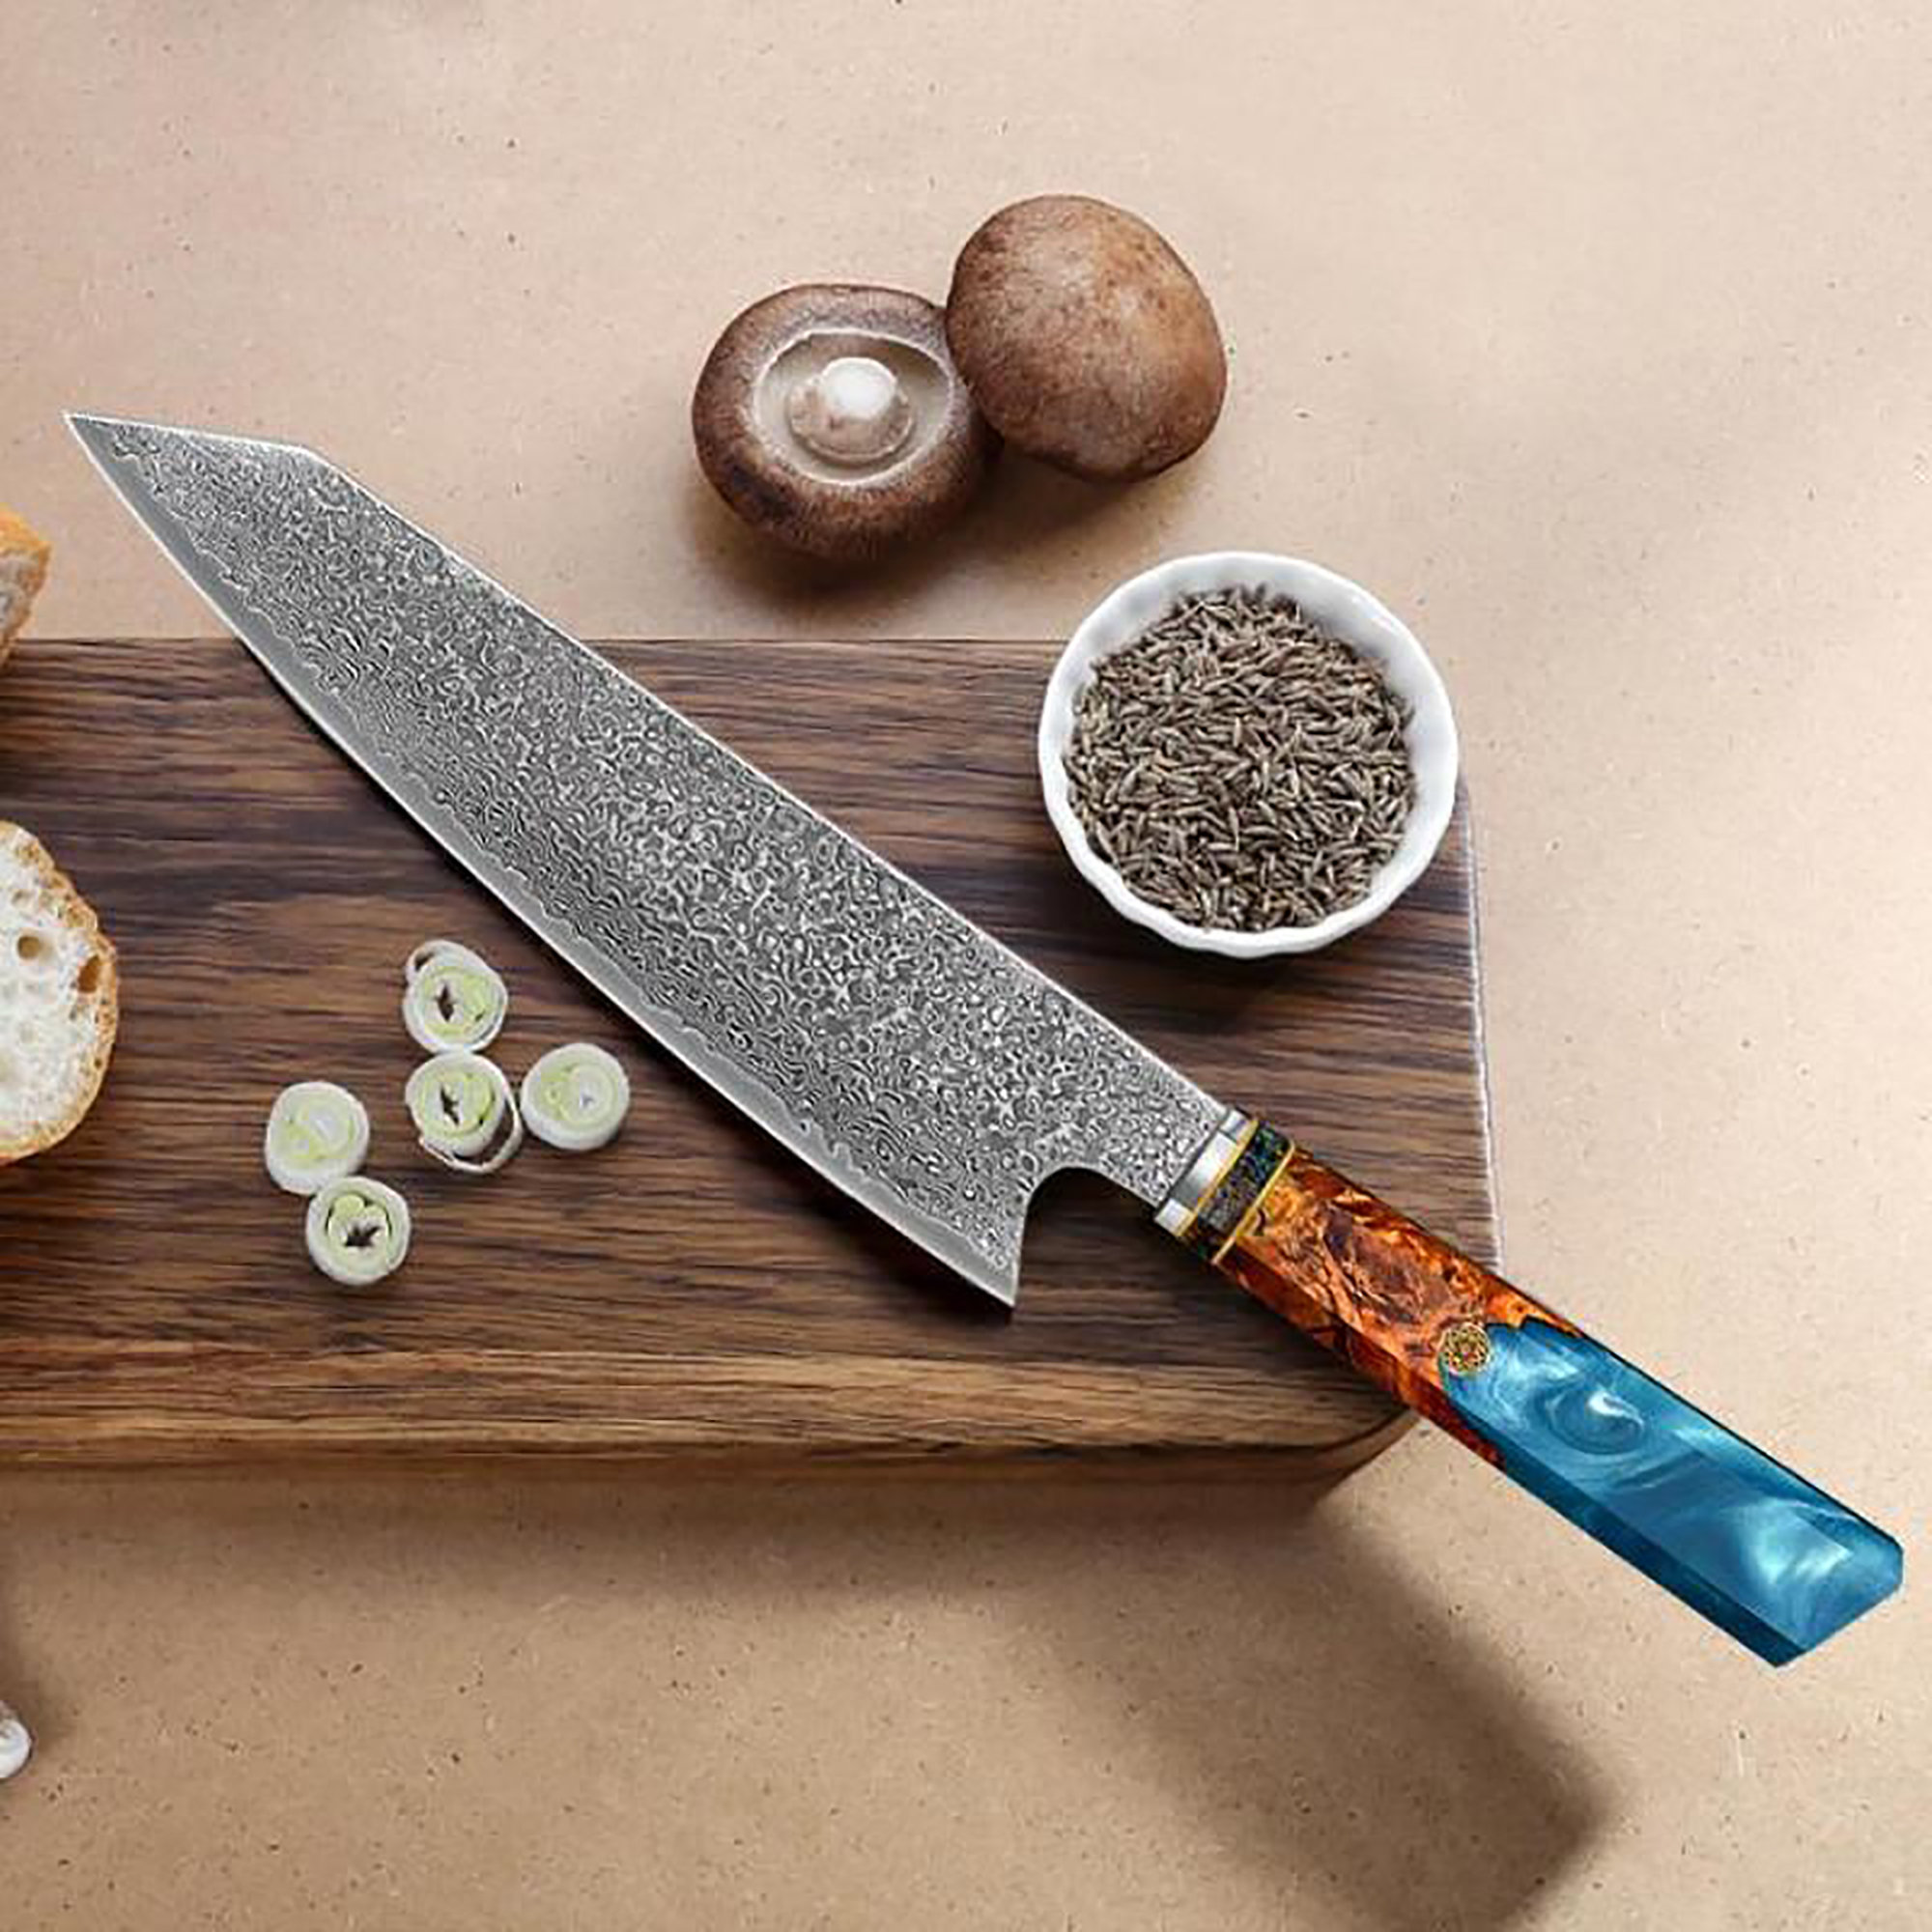 Seido Japanese knife set is over 80% off this holiday season